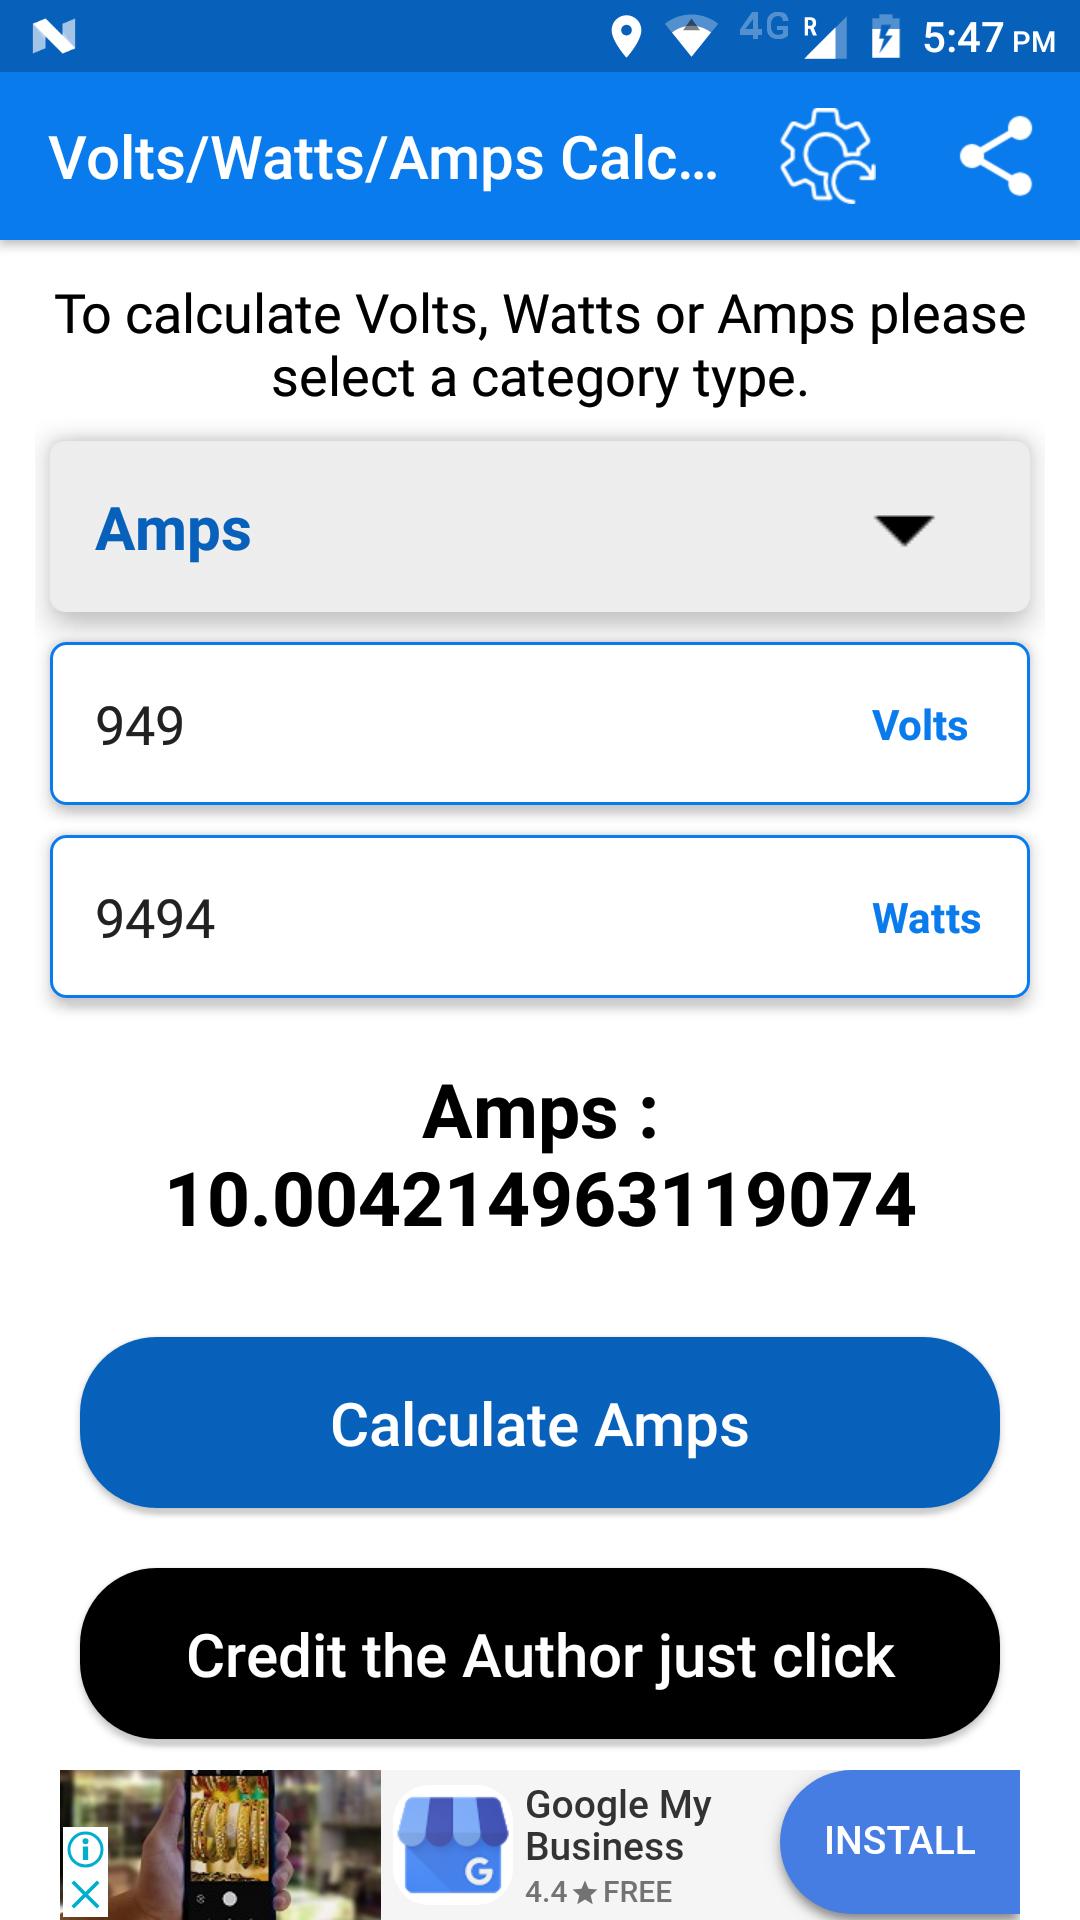 Volts/Watts/Amps Calculator for Android - APK Download